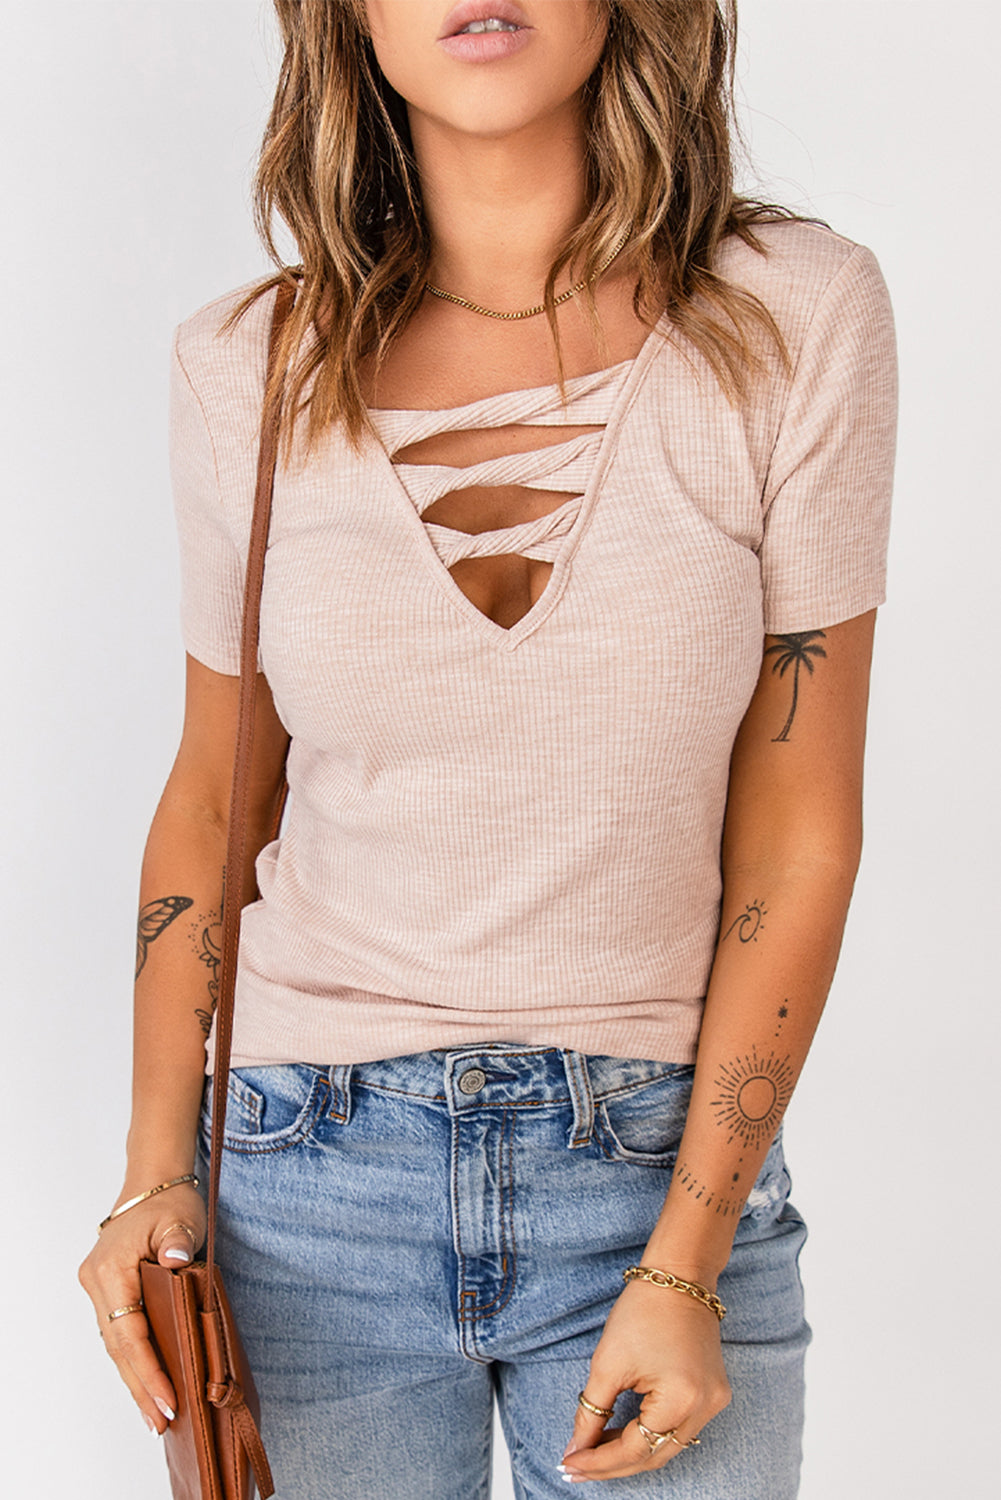 Chic and Comfy: Strappy Ribbed Knit T-Shirt for Effortless Style ShopOnlyDeal